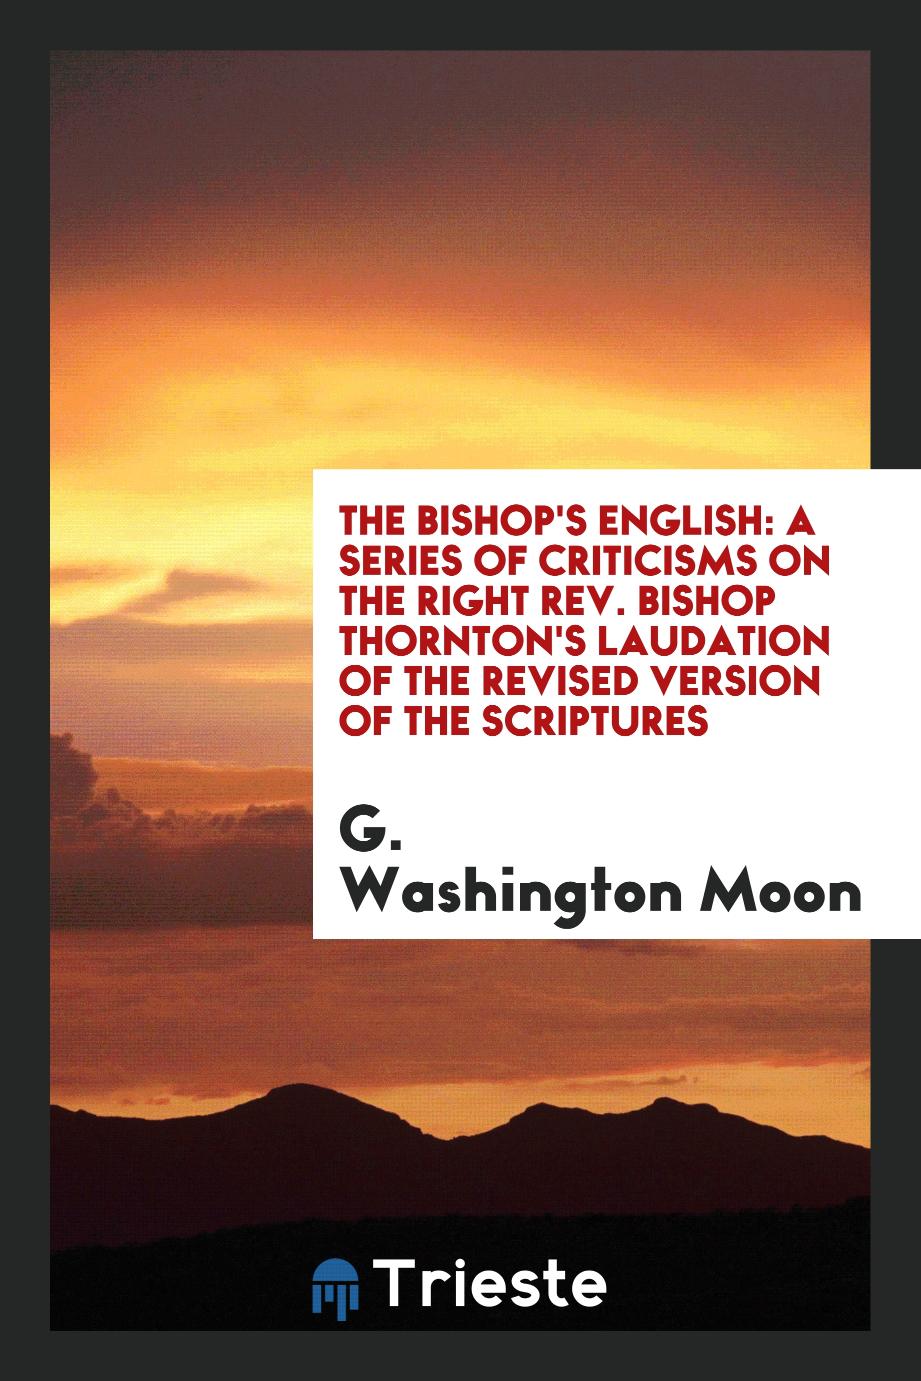 The bishop's English: a series of criticisms on the Right Rev. Bishop Thornton's laudation of the revised version of the Scriptures